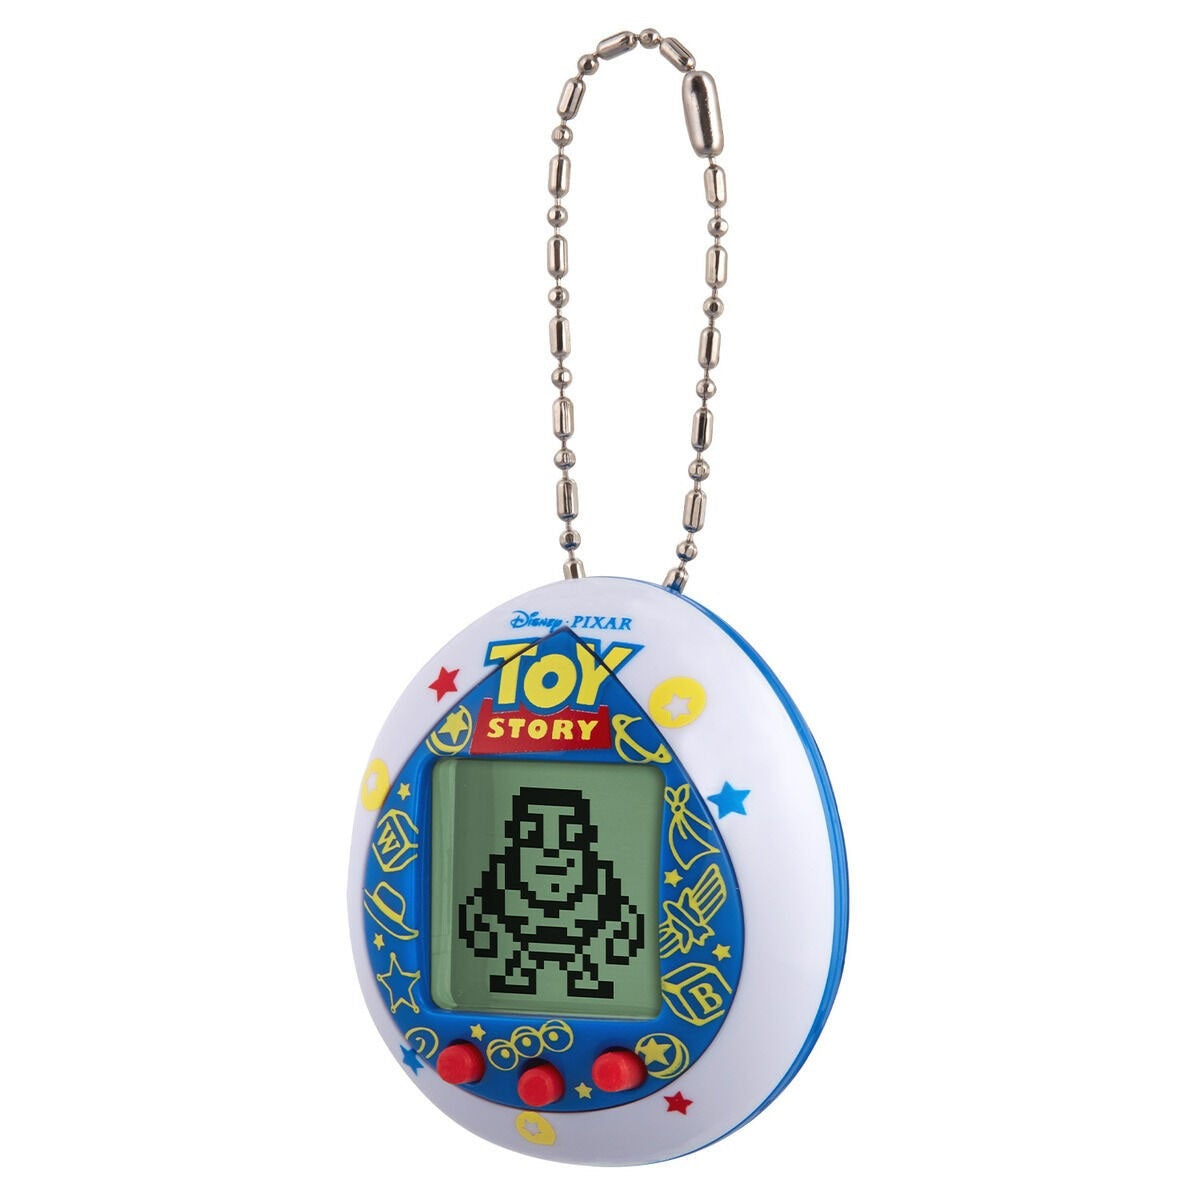 Toy Story: Tamagotchi Friends Paint Ver. (Electronic Toy)-Bandai-Ace Cards & Collectibles